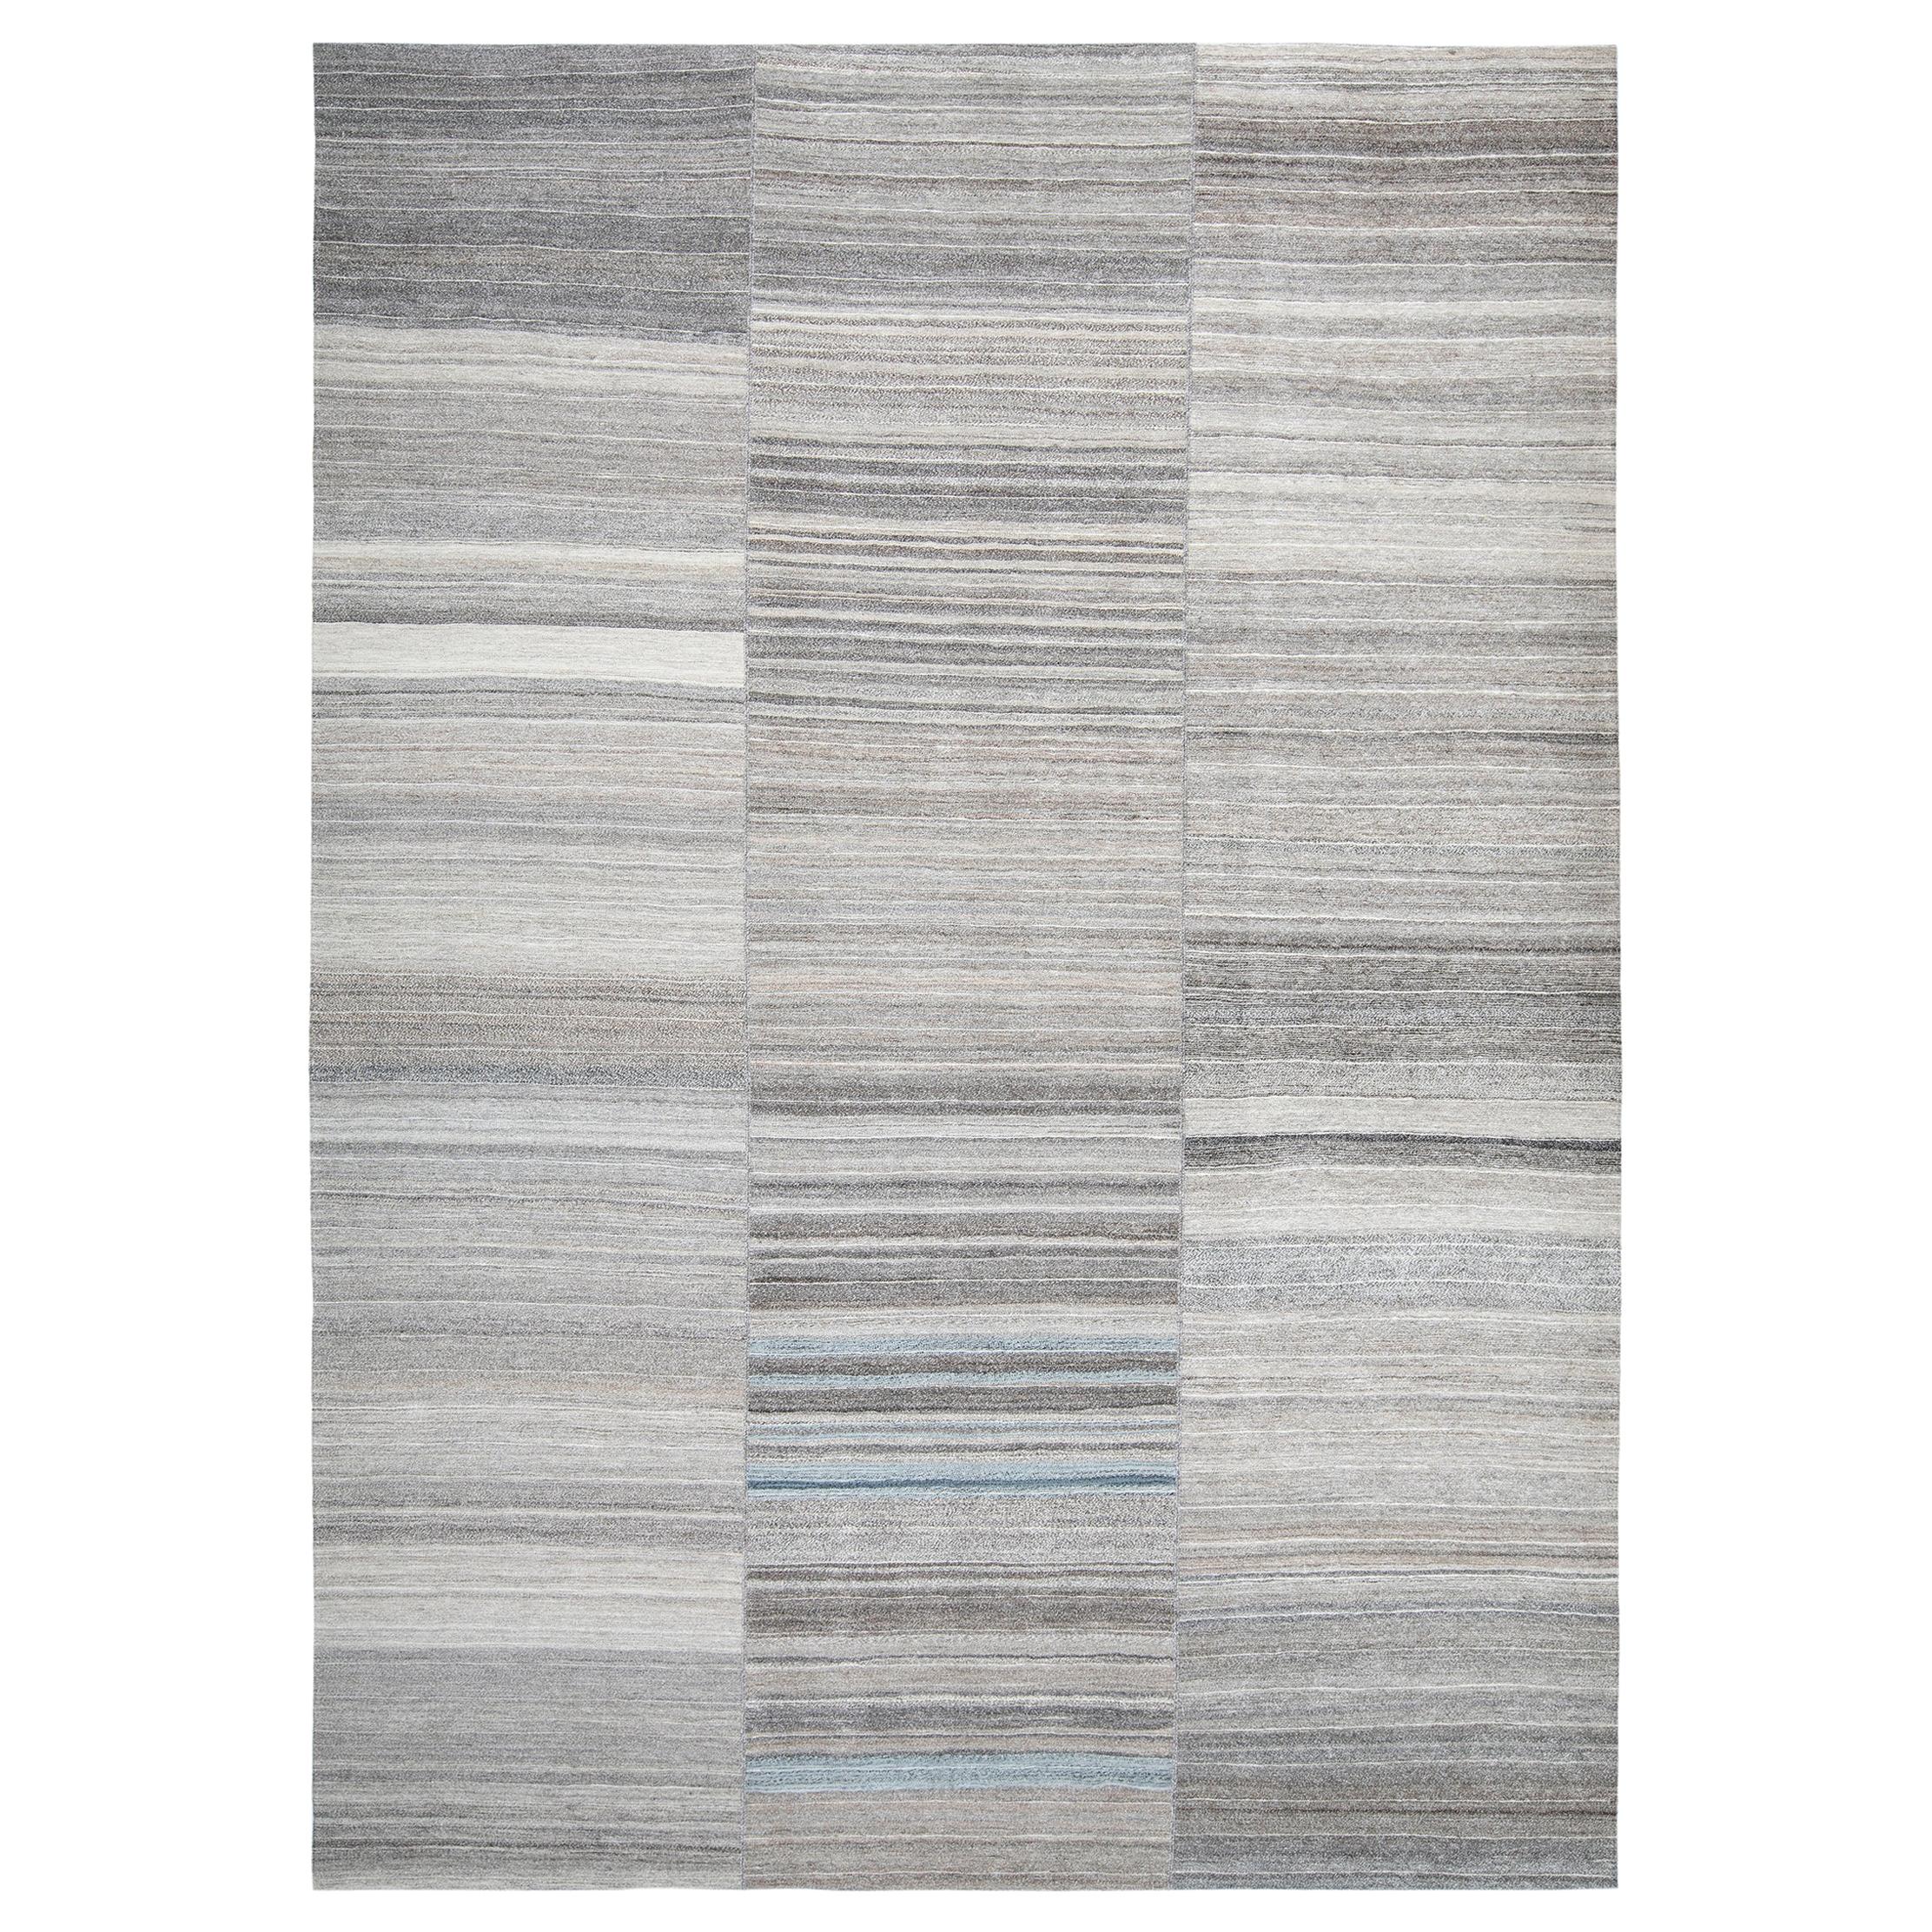 Modern Mazandaran Style Handwoven Flatweave Rug in Natural, Grey and Blue Colors For Sale